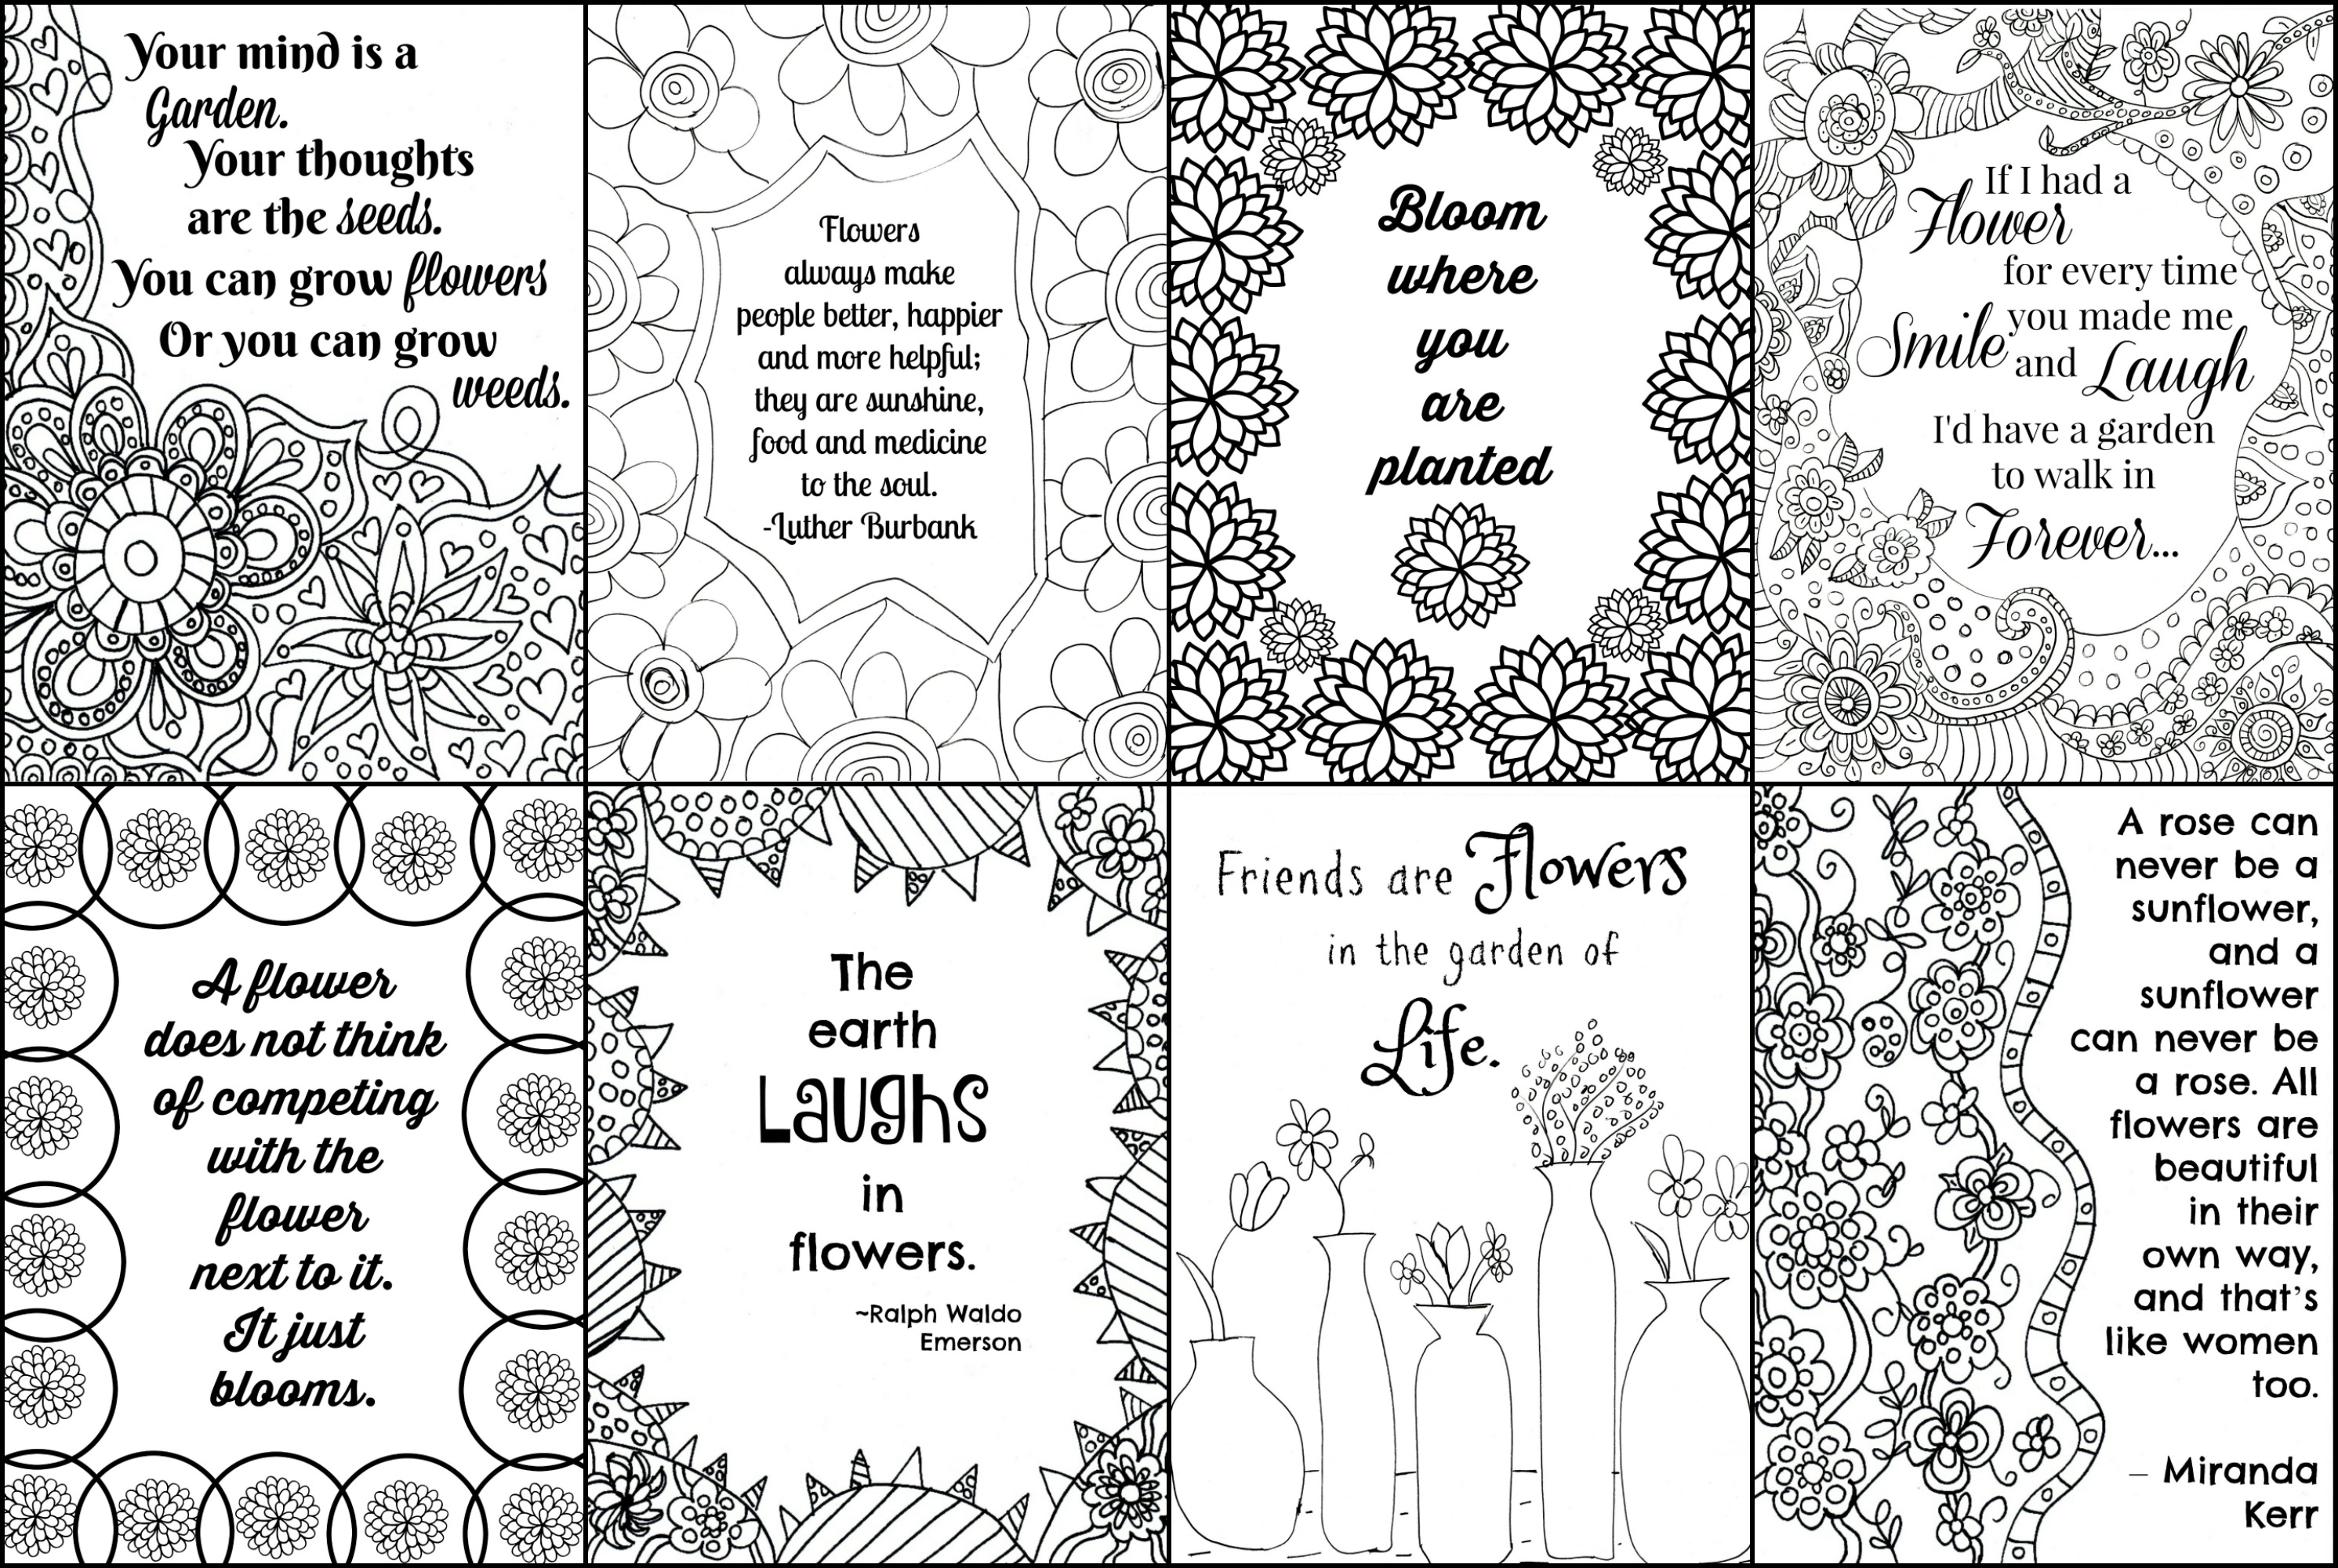 FREE Printable Flower Quote Coloring Pages